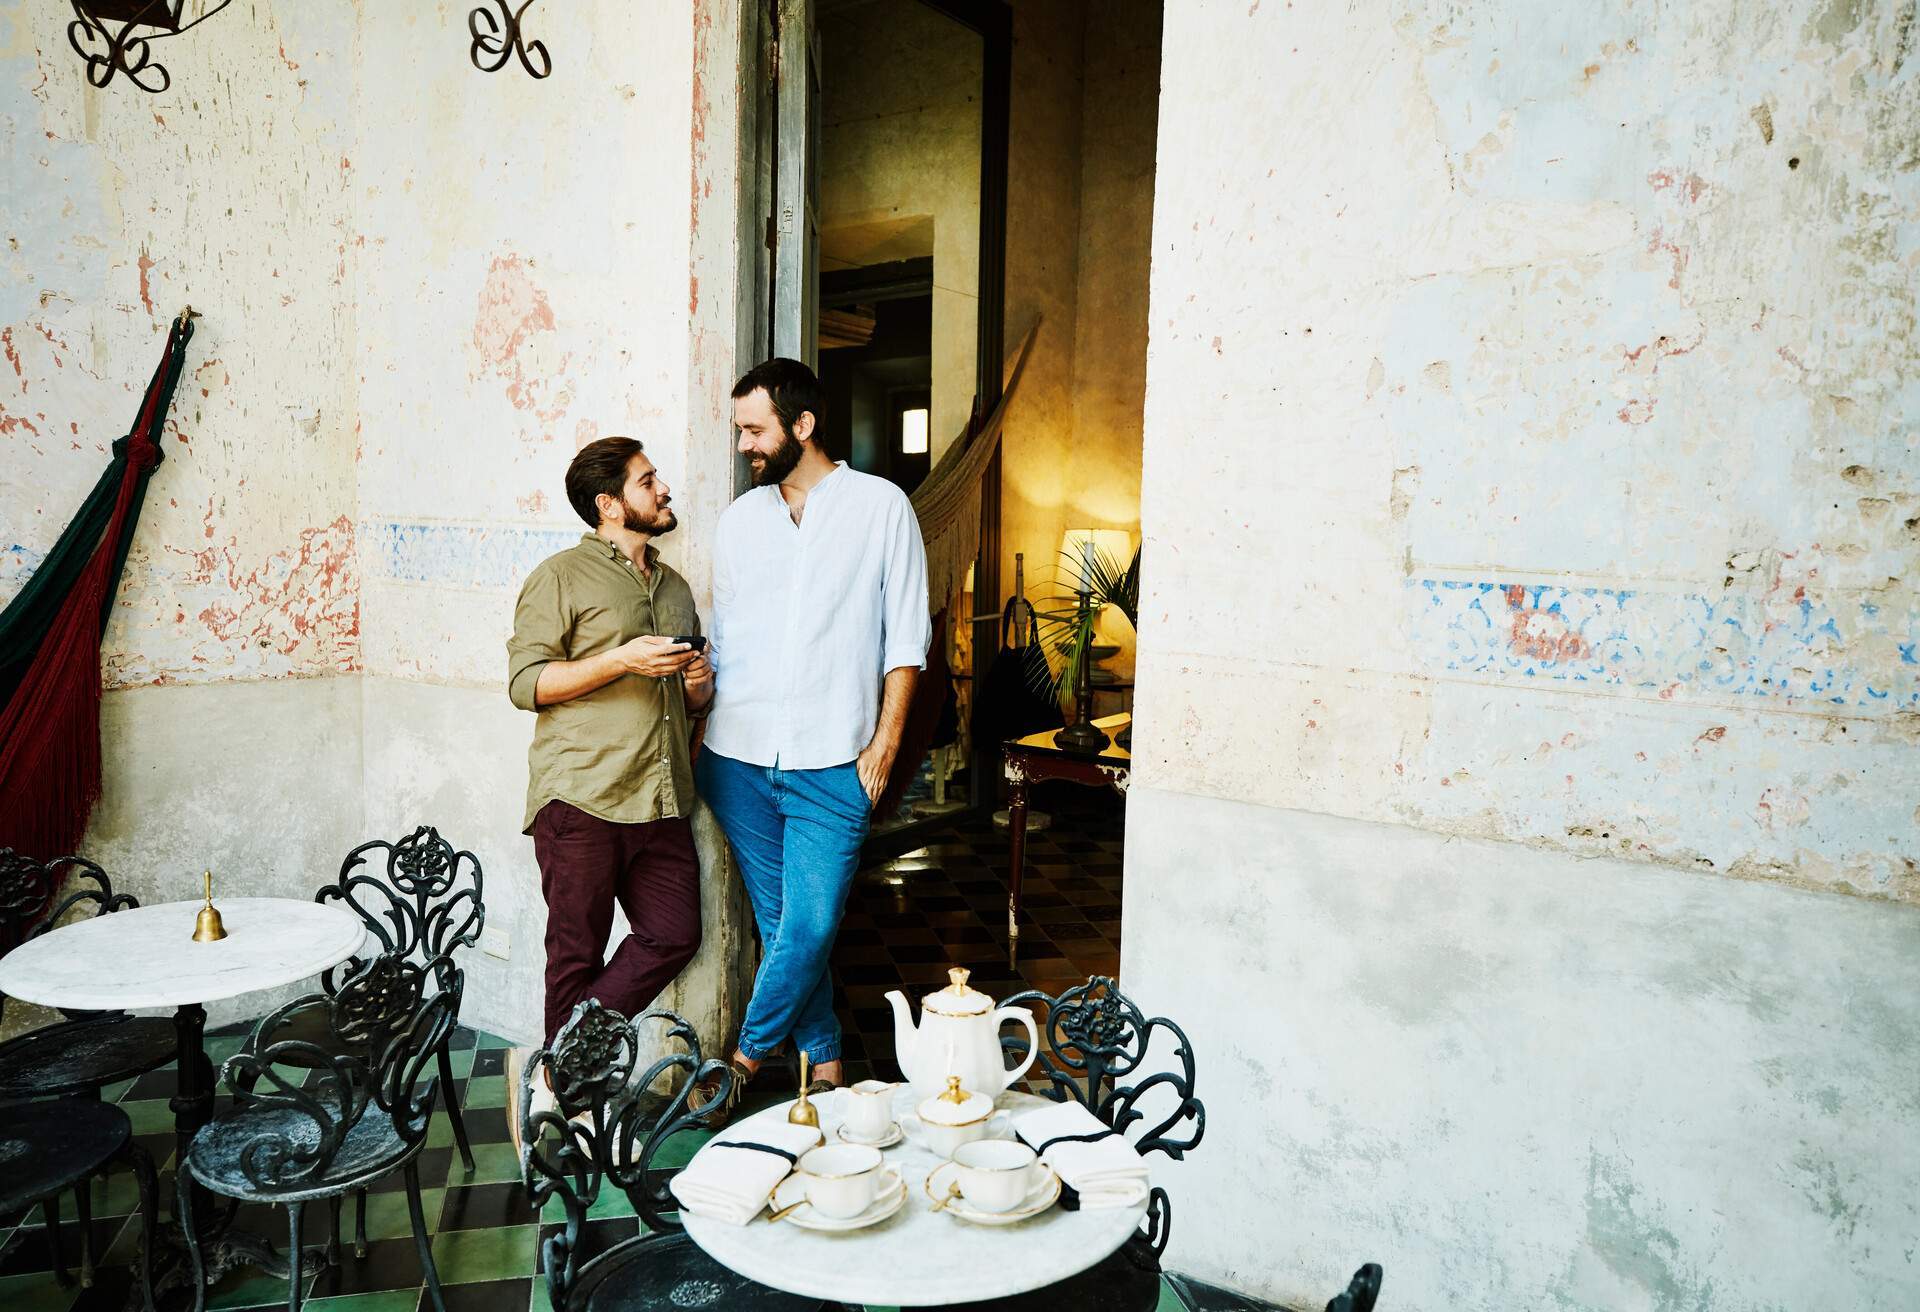 A gay couple leans on the wall of an outdoor cafe.